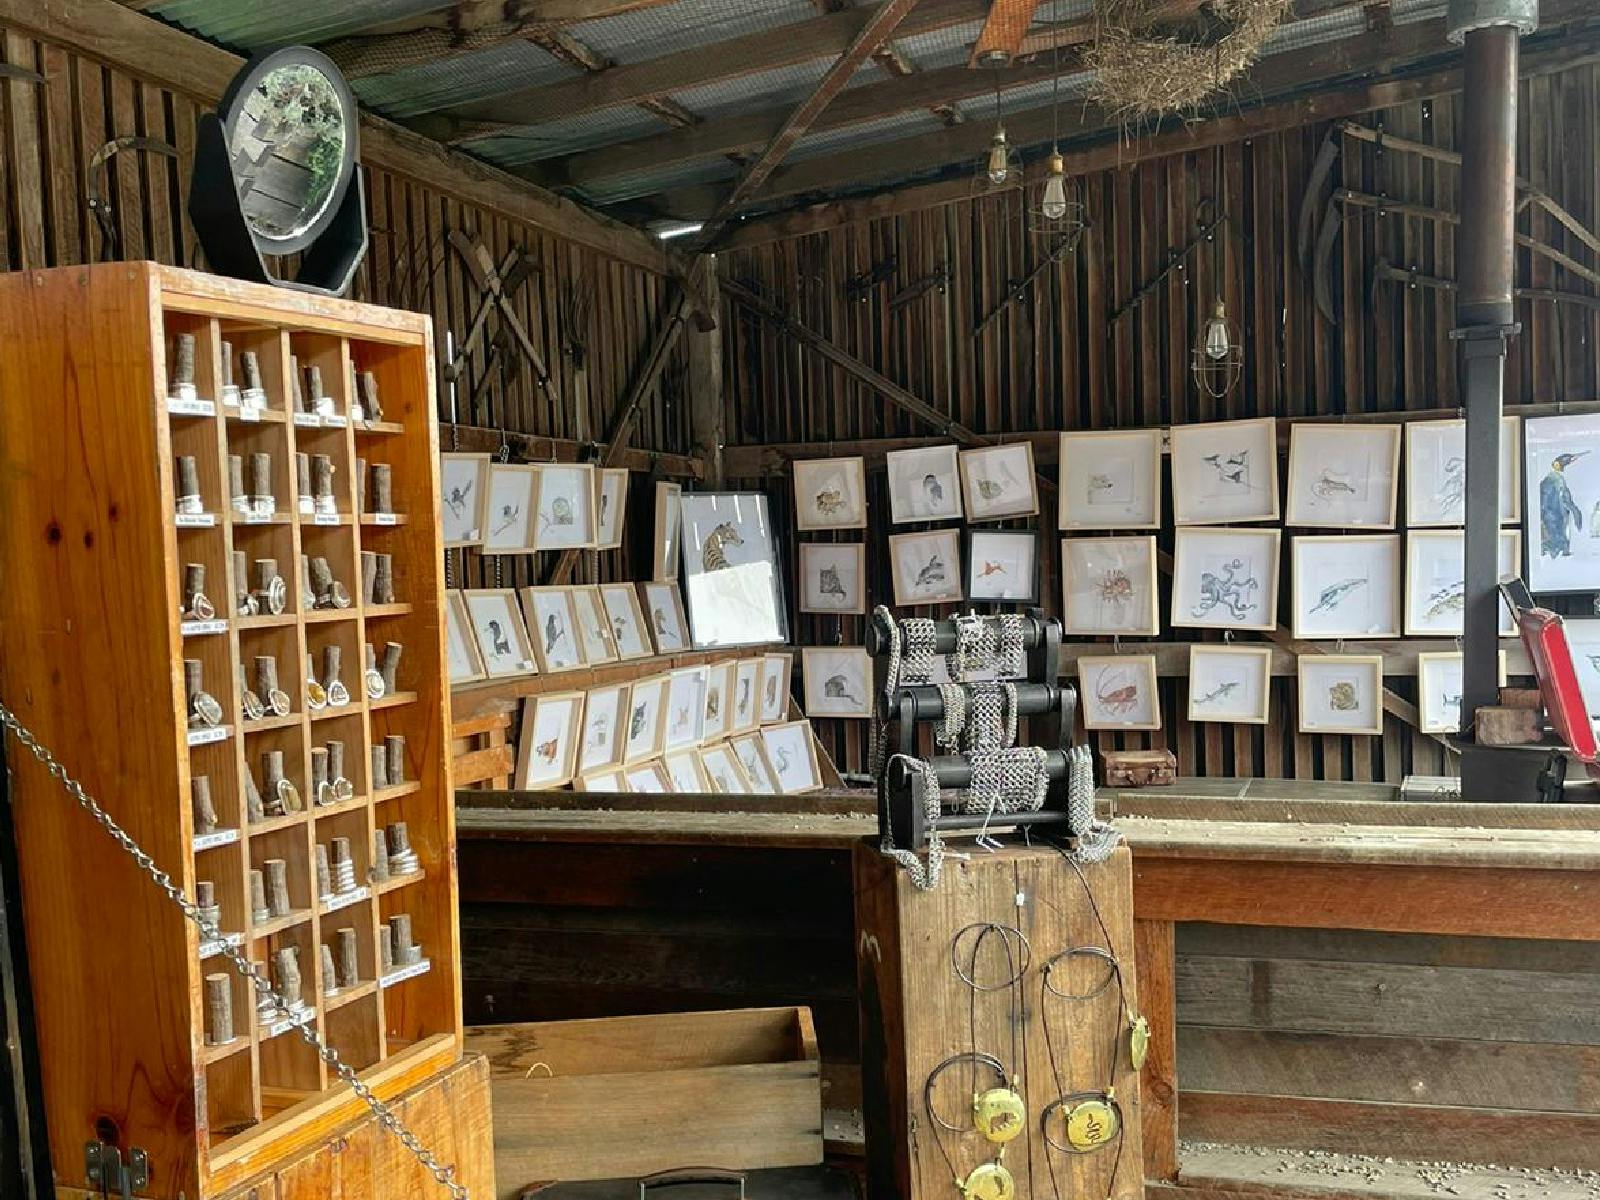 A stall within the barn selling metalwork/jewelry, with an art store in the back.